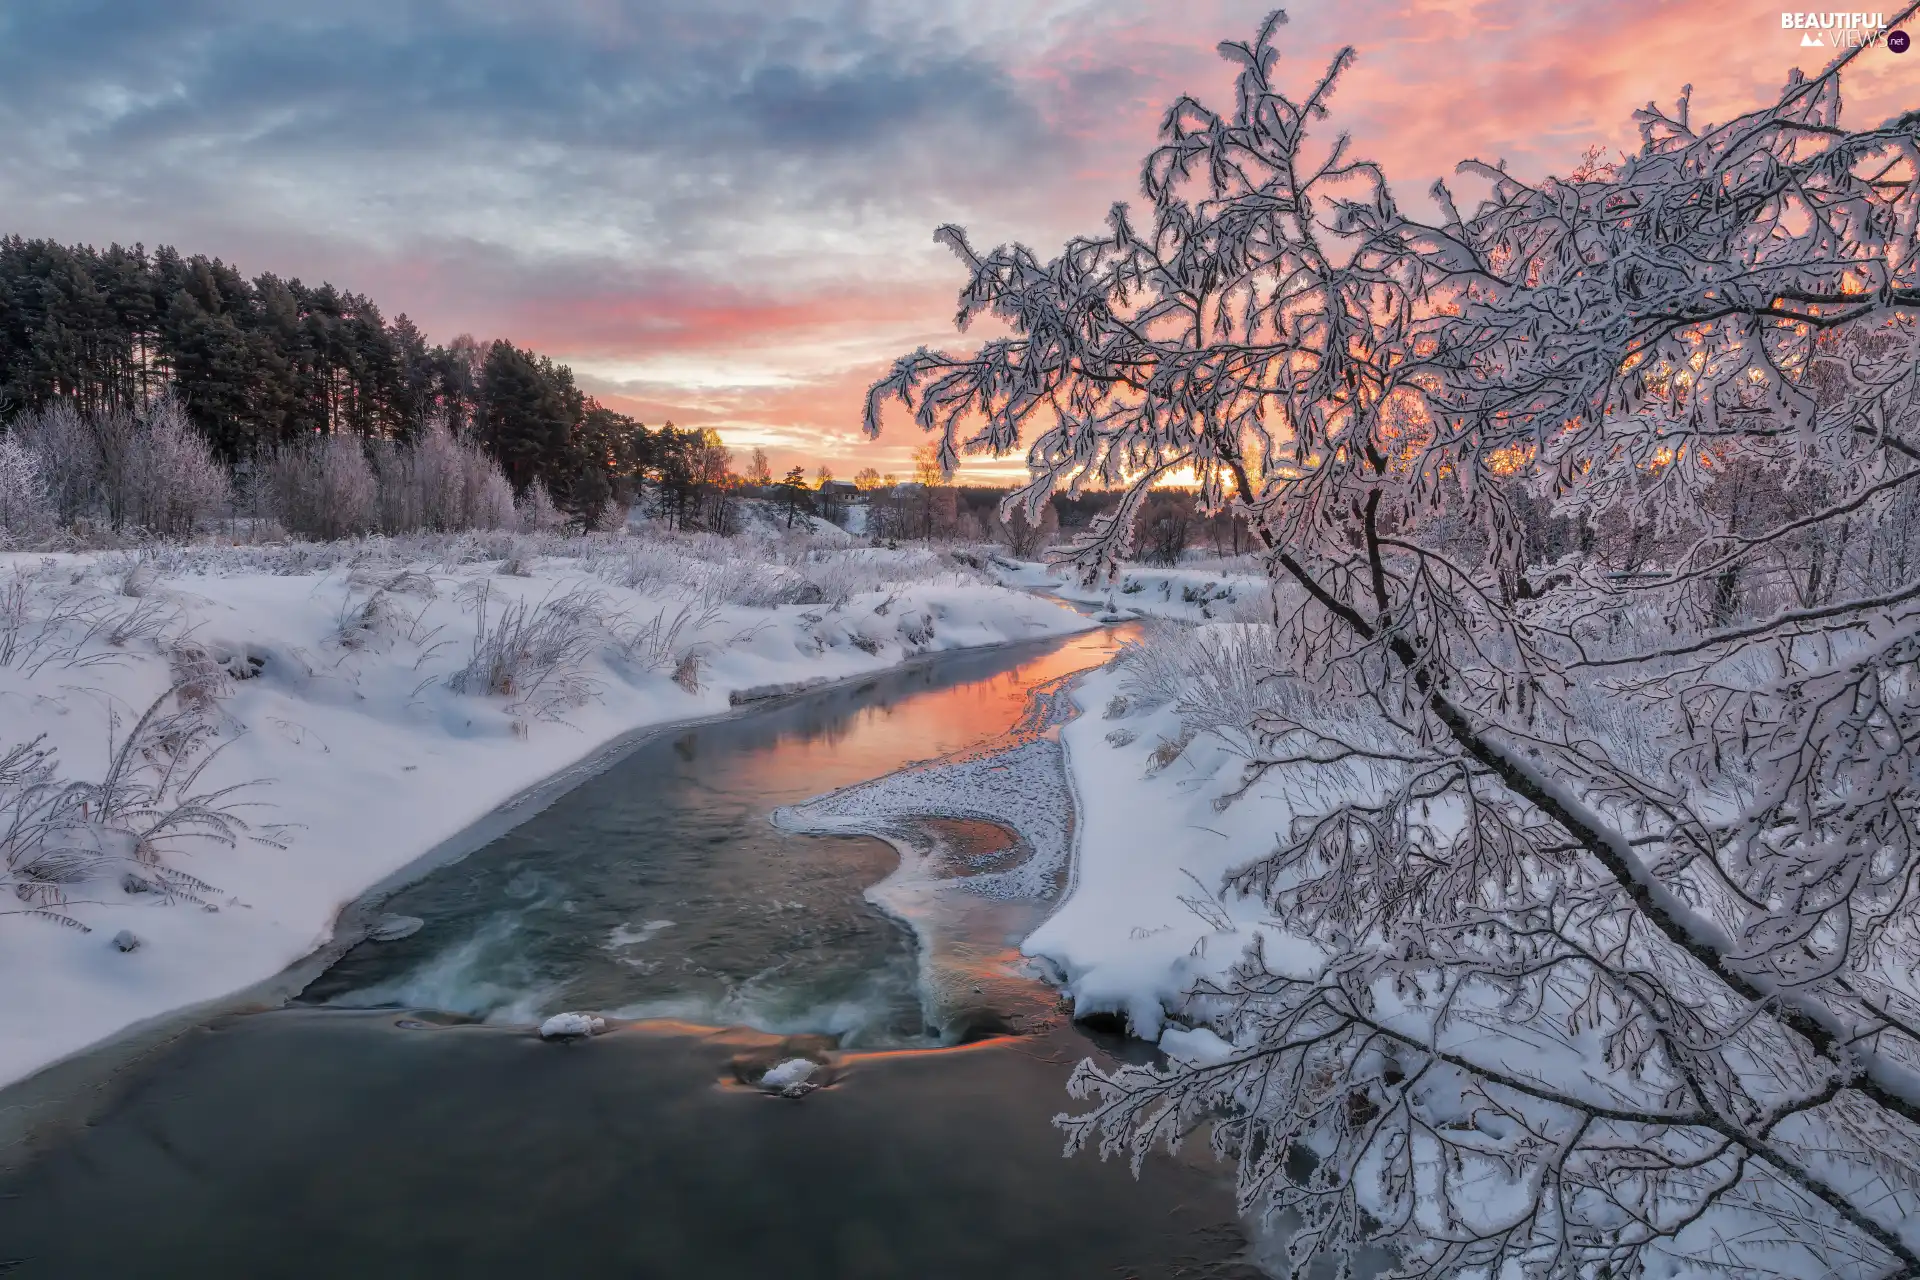 viewes, River, branch pics, trees, winter, Snowy, Sunrise